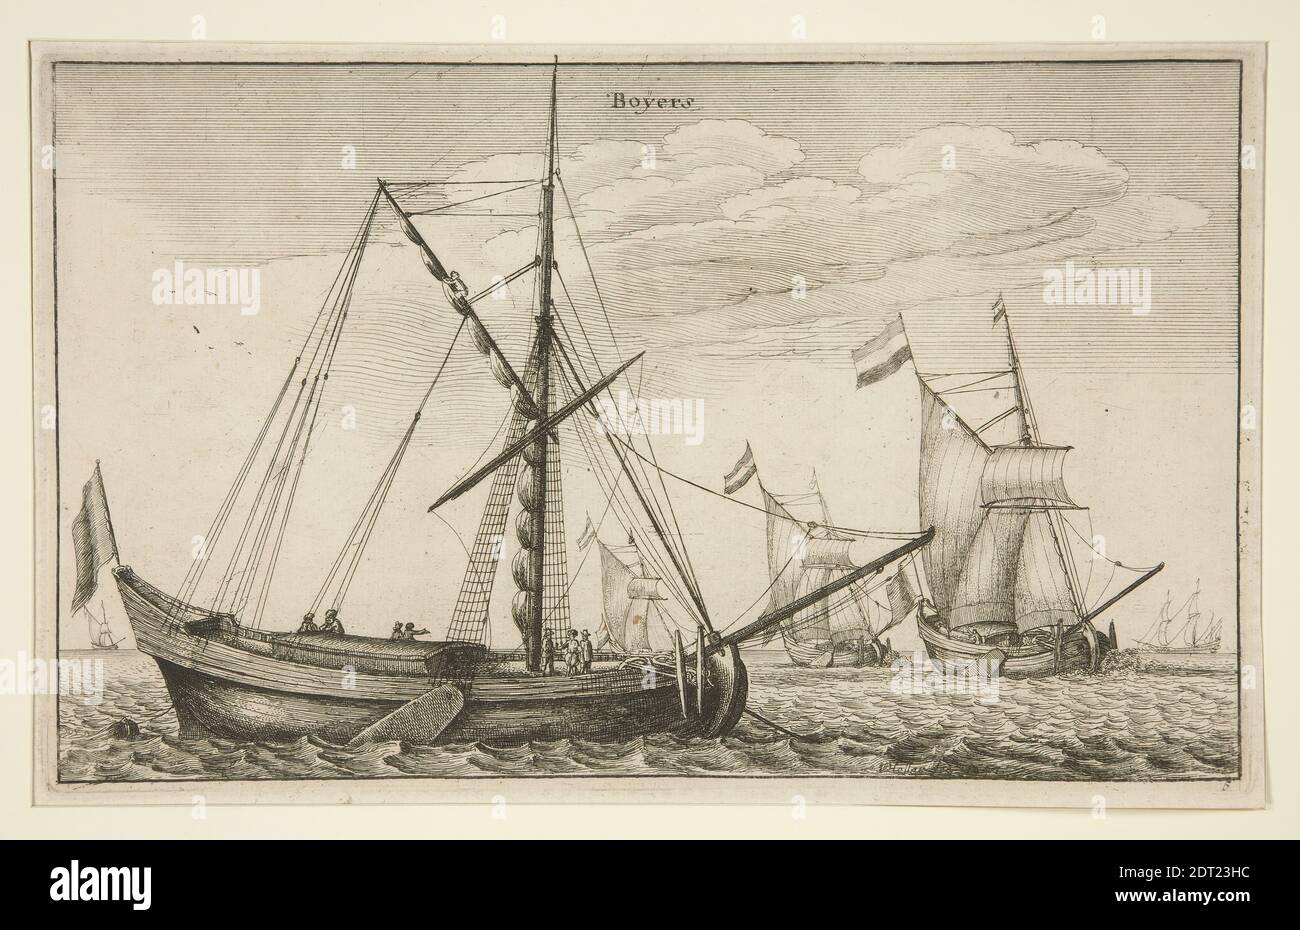 Artist: Wenceslaus Hollar, Bohemian, 1607–1677, Dutch Cargo Ships, from the series Navium Variae Figurae et Formae, Etching, platemark: 14.7 × 24 cm (5 13/16 × 9 7/16 in.), Made in Bohemia, Czech Republic, Bohemian, 17th century, Works on Paper - Prints Stock Photo